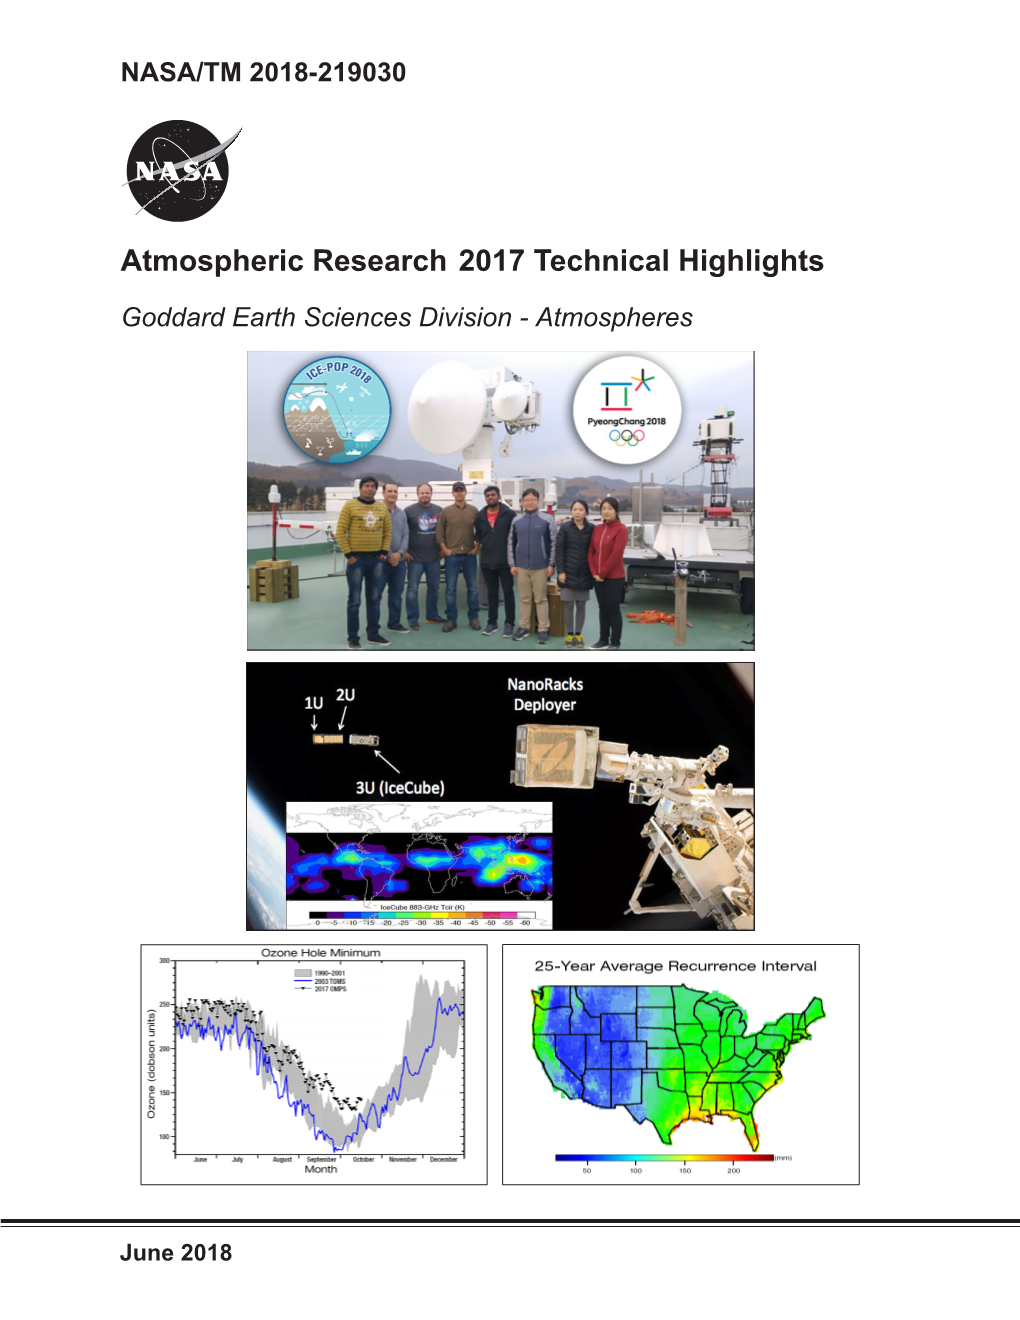 2017 Atmospheric Research Technical Highlights